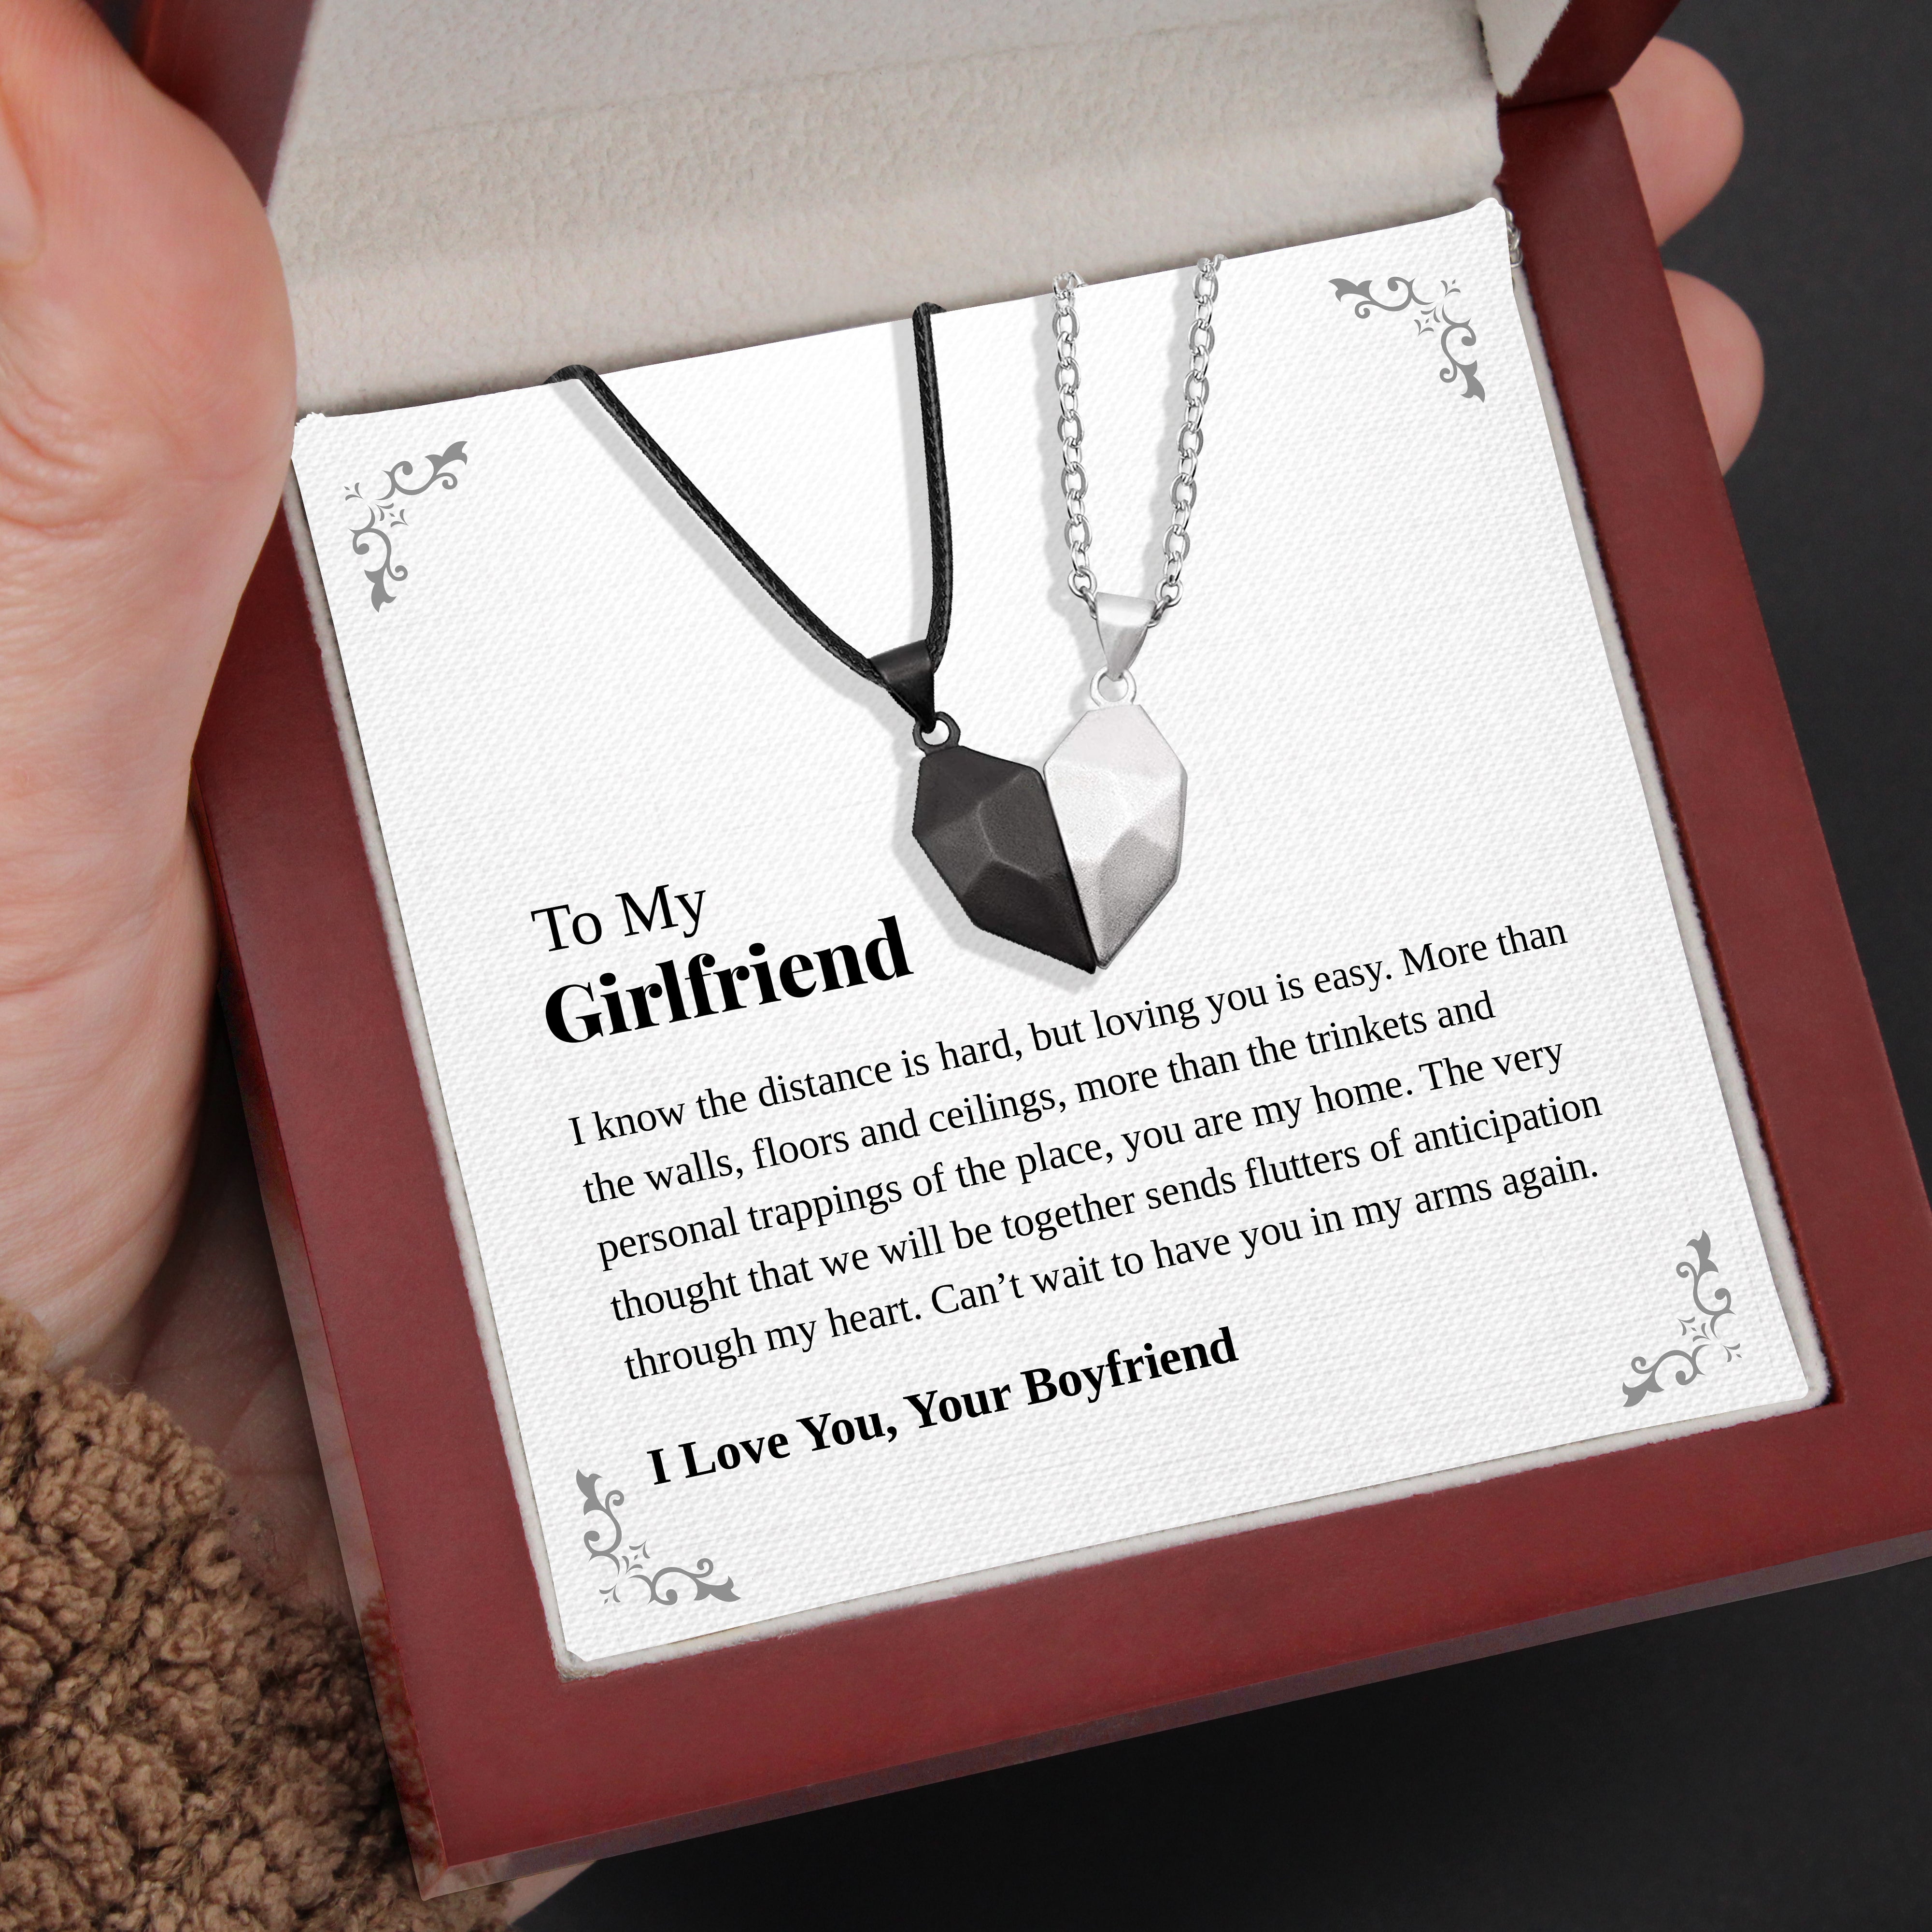 To My Girlfriend | “Flutters of Anticipation” | His-and-Hers Magnetic Hearts Necklaces